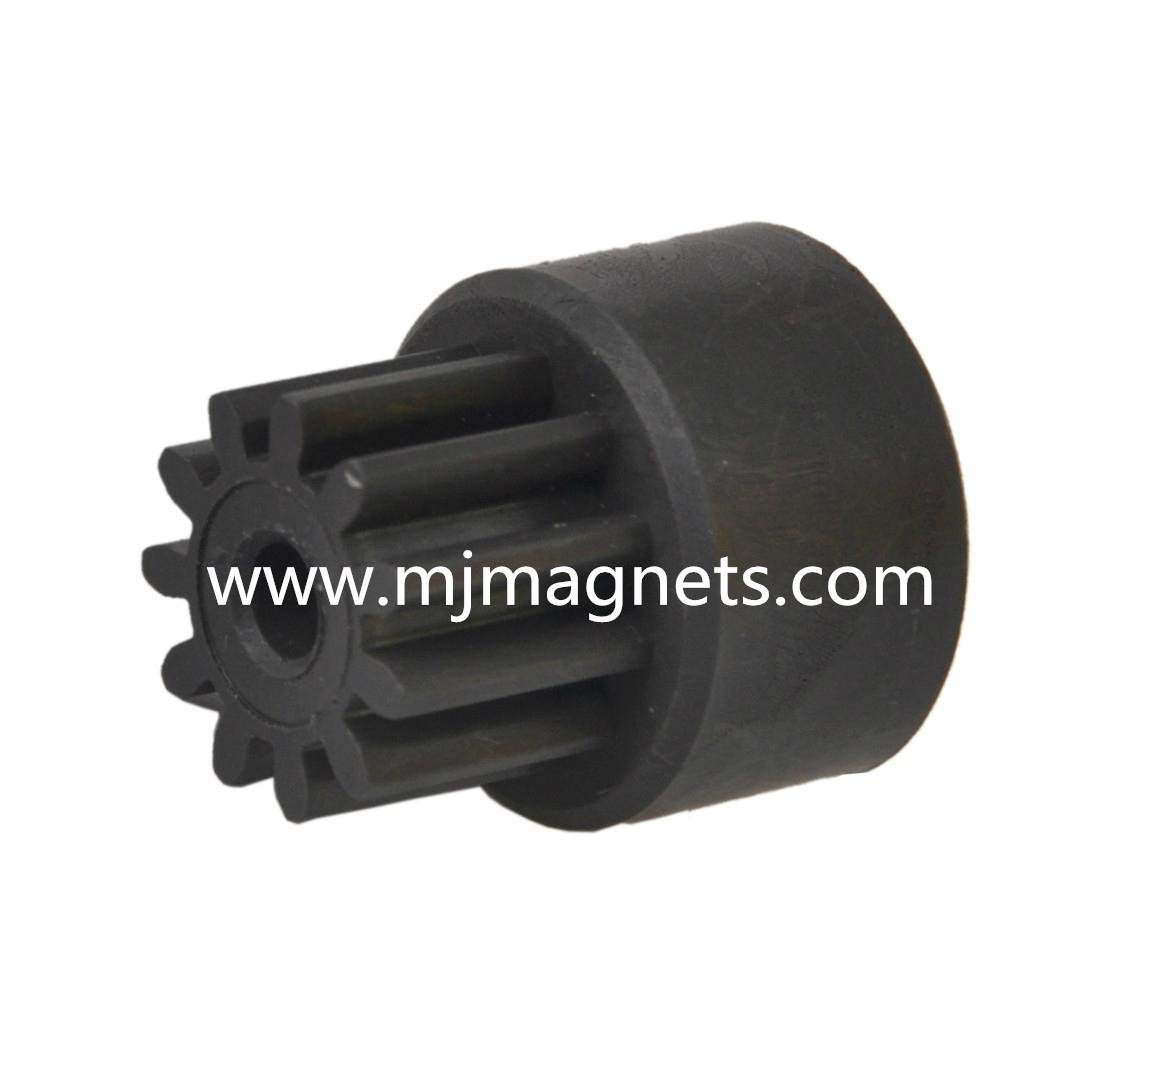 Plastic injection bonded magnetic gear 3